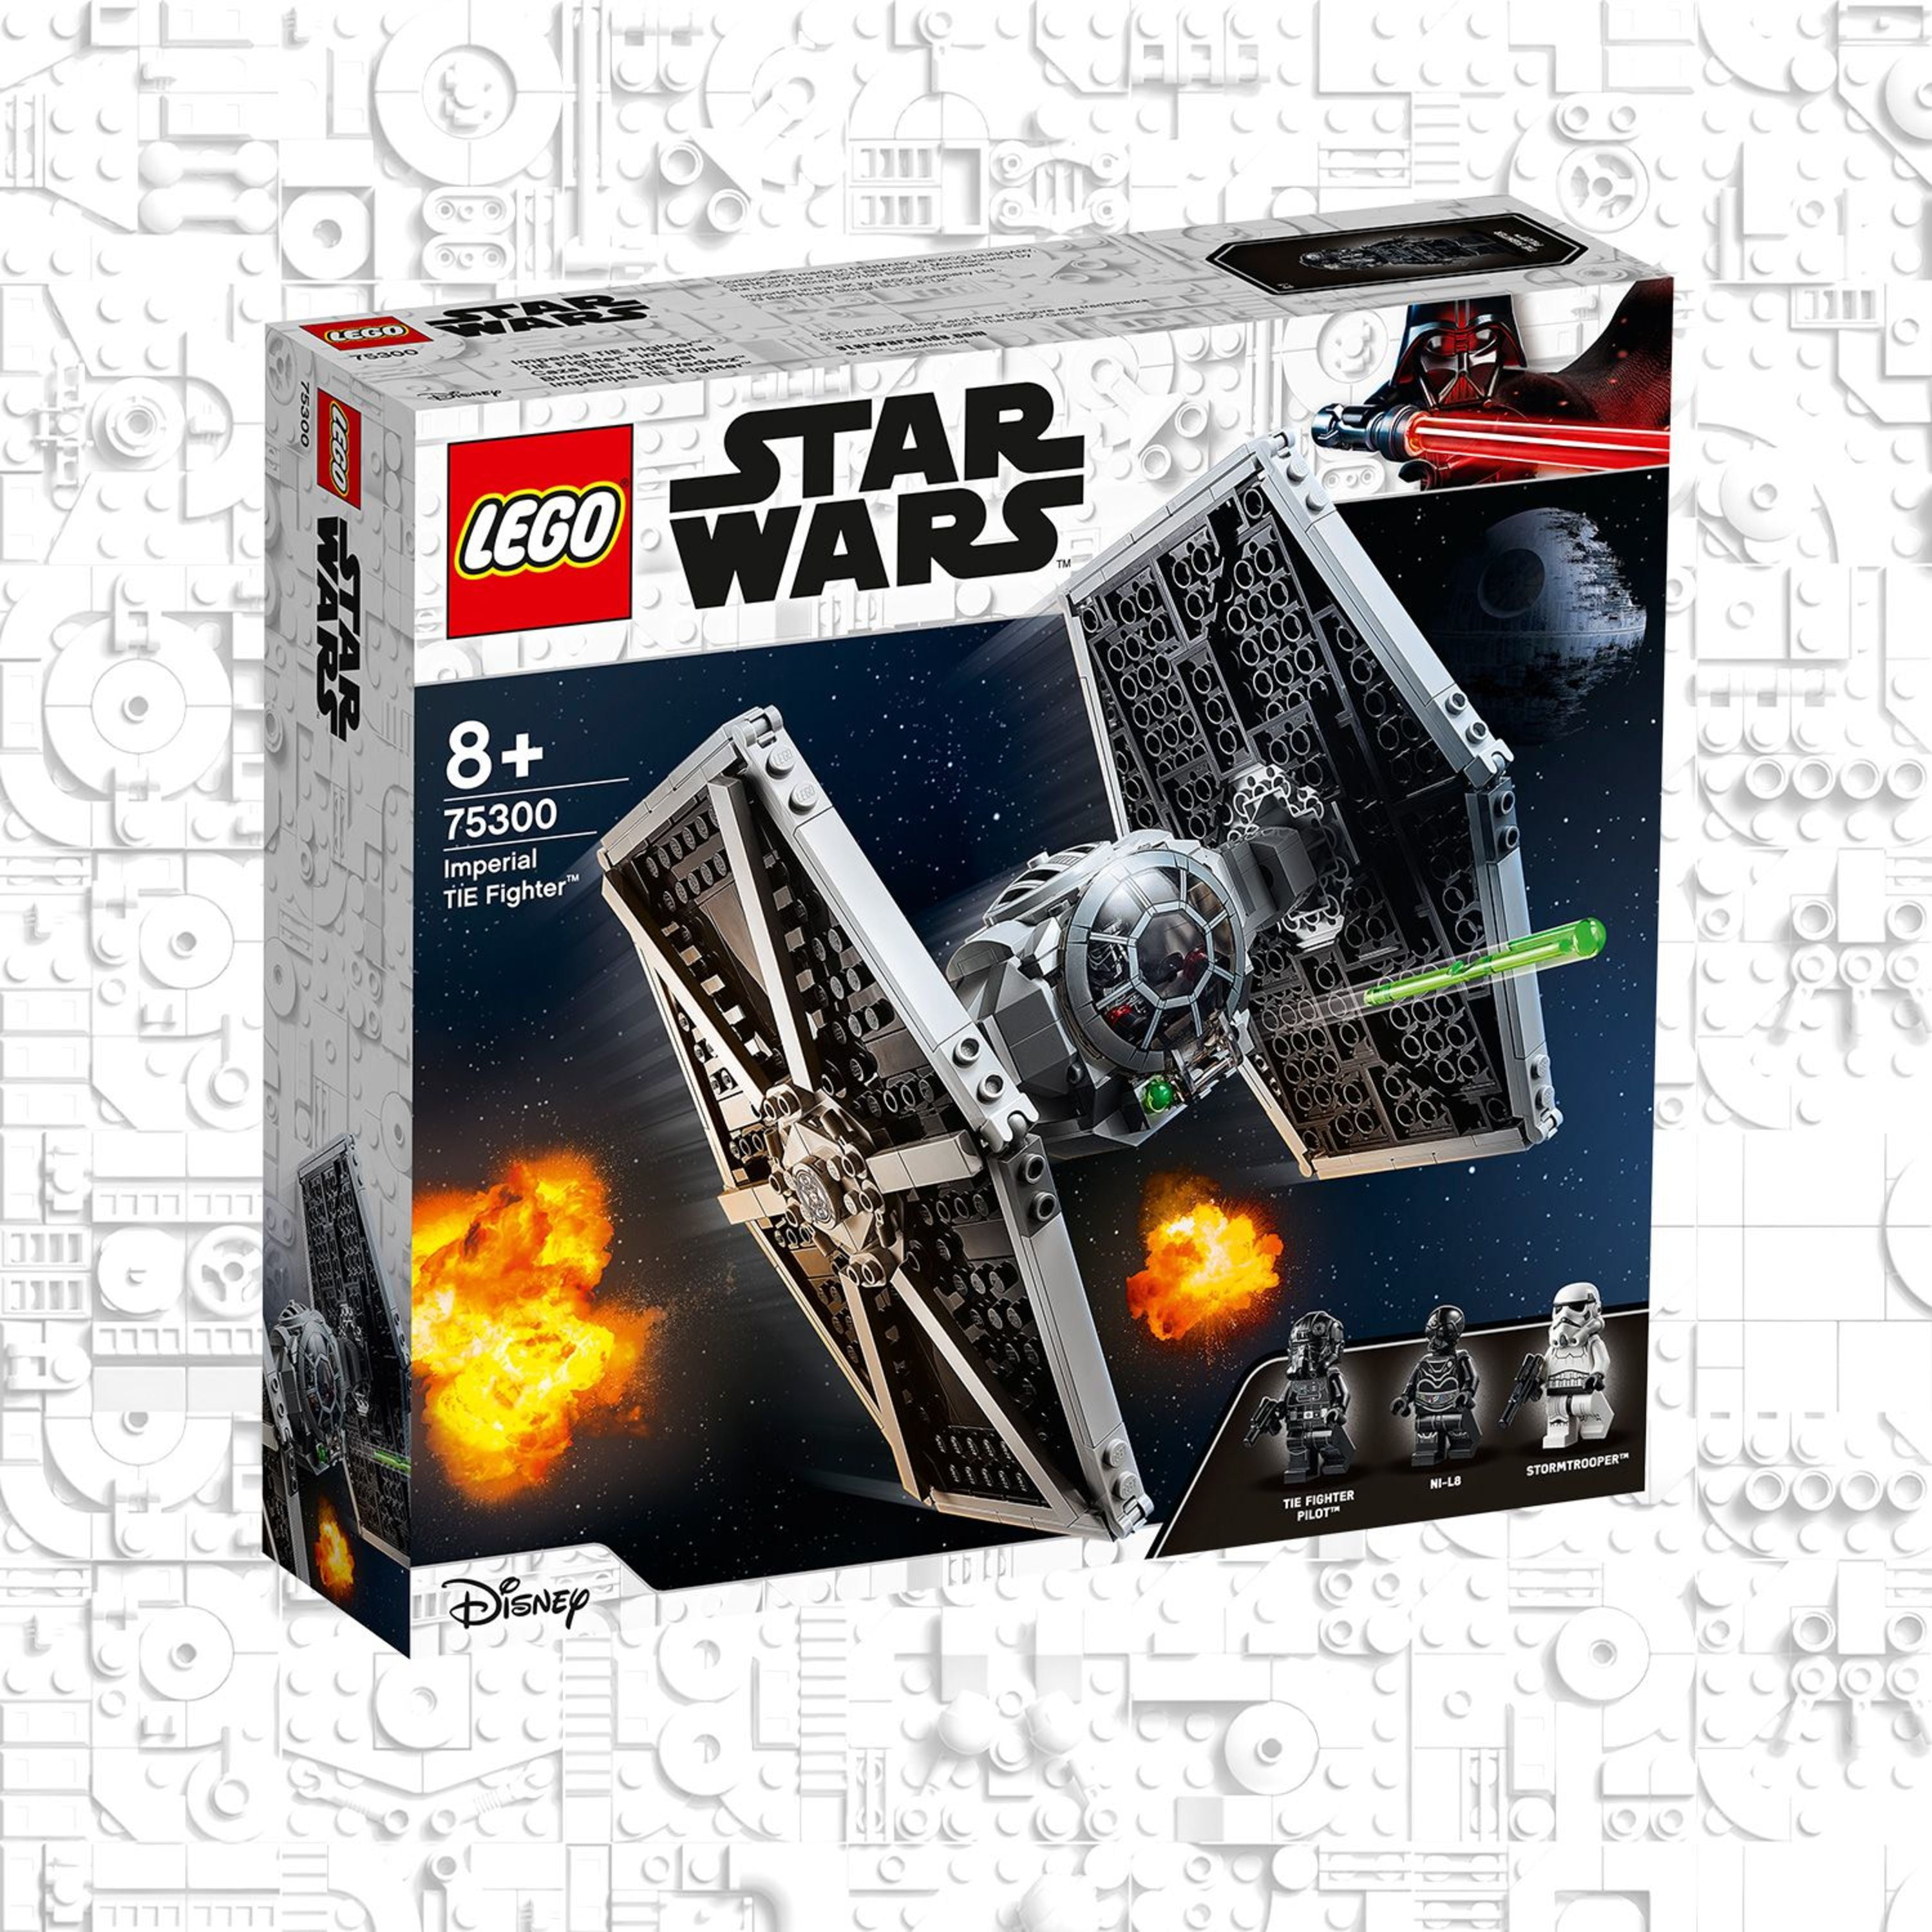 LEGO Star Wars Imperial TIE Fighter 75300 Building with Stormtrooper and TIE Fighter Pilot Minifigures The Skywalker Saga, Gift Idea for Star Wars Fans - Walmart.com